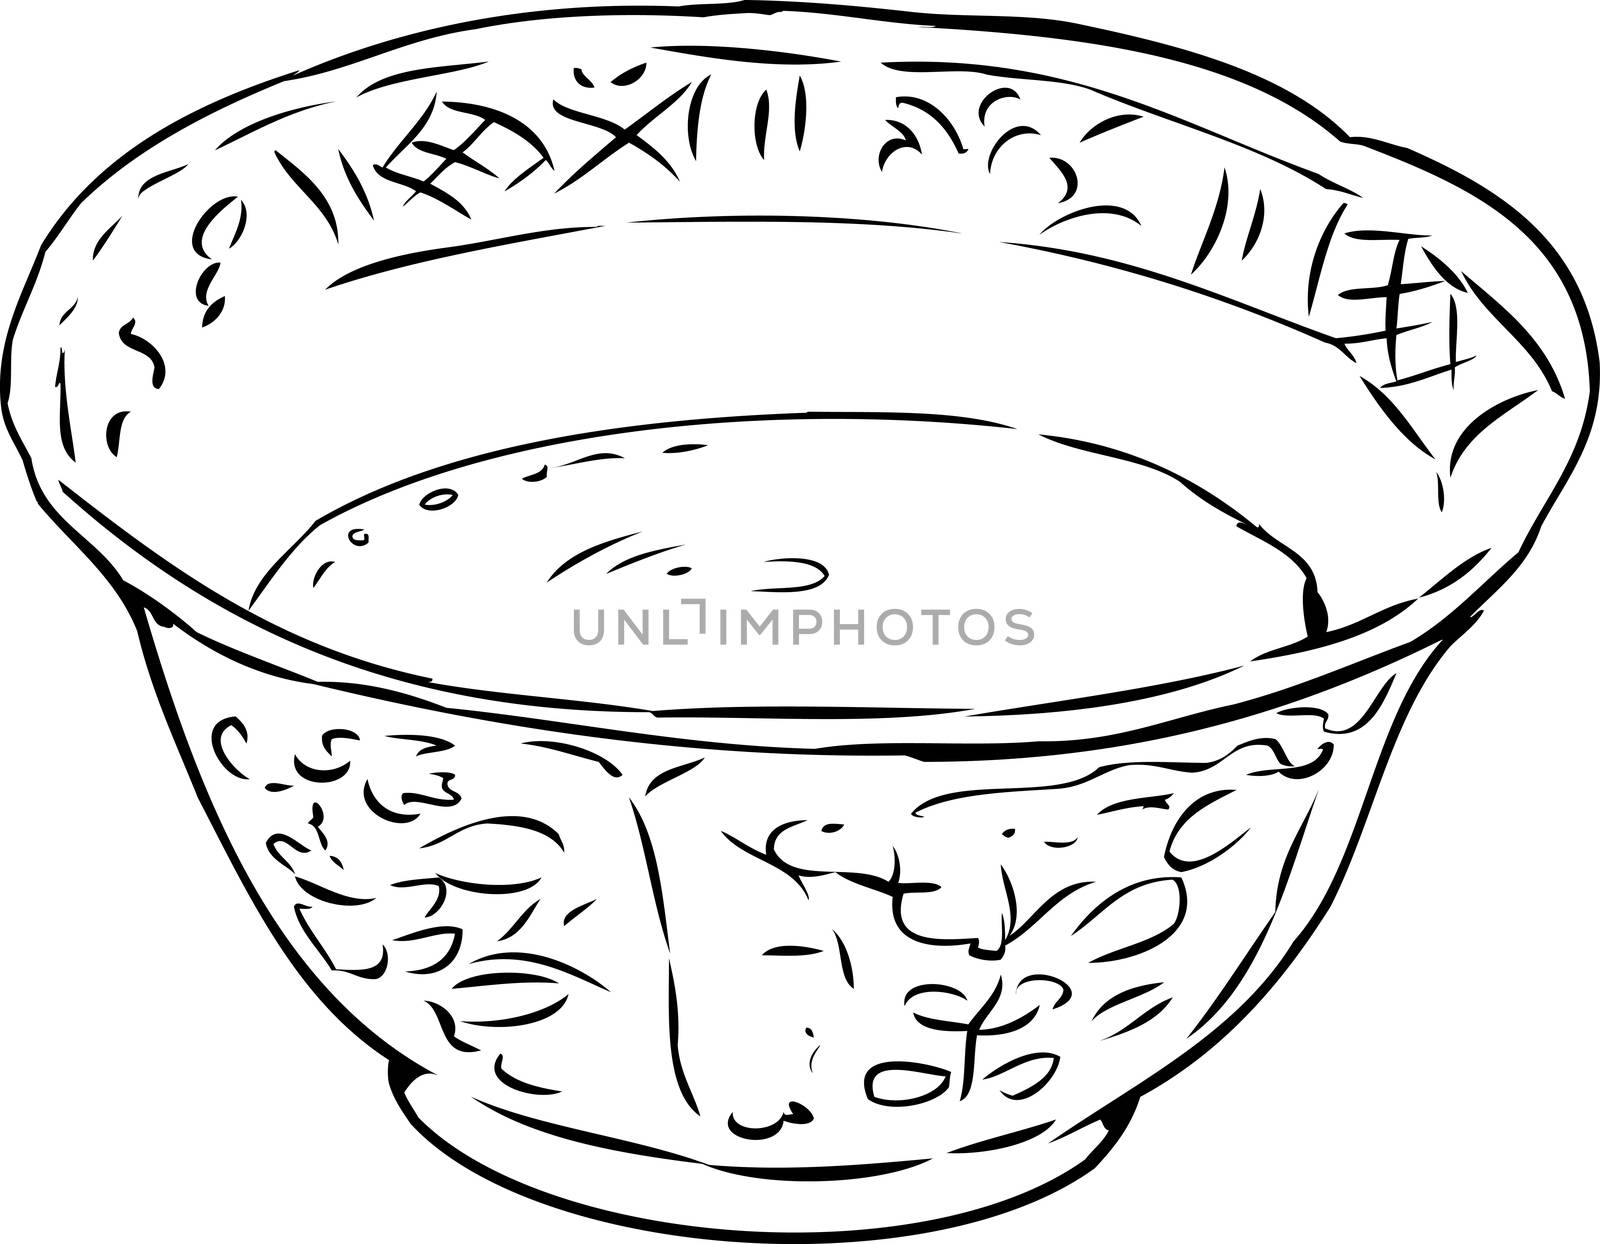 Outlined Antique Teacup with Coffee by TheBlackRhino